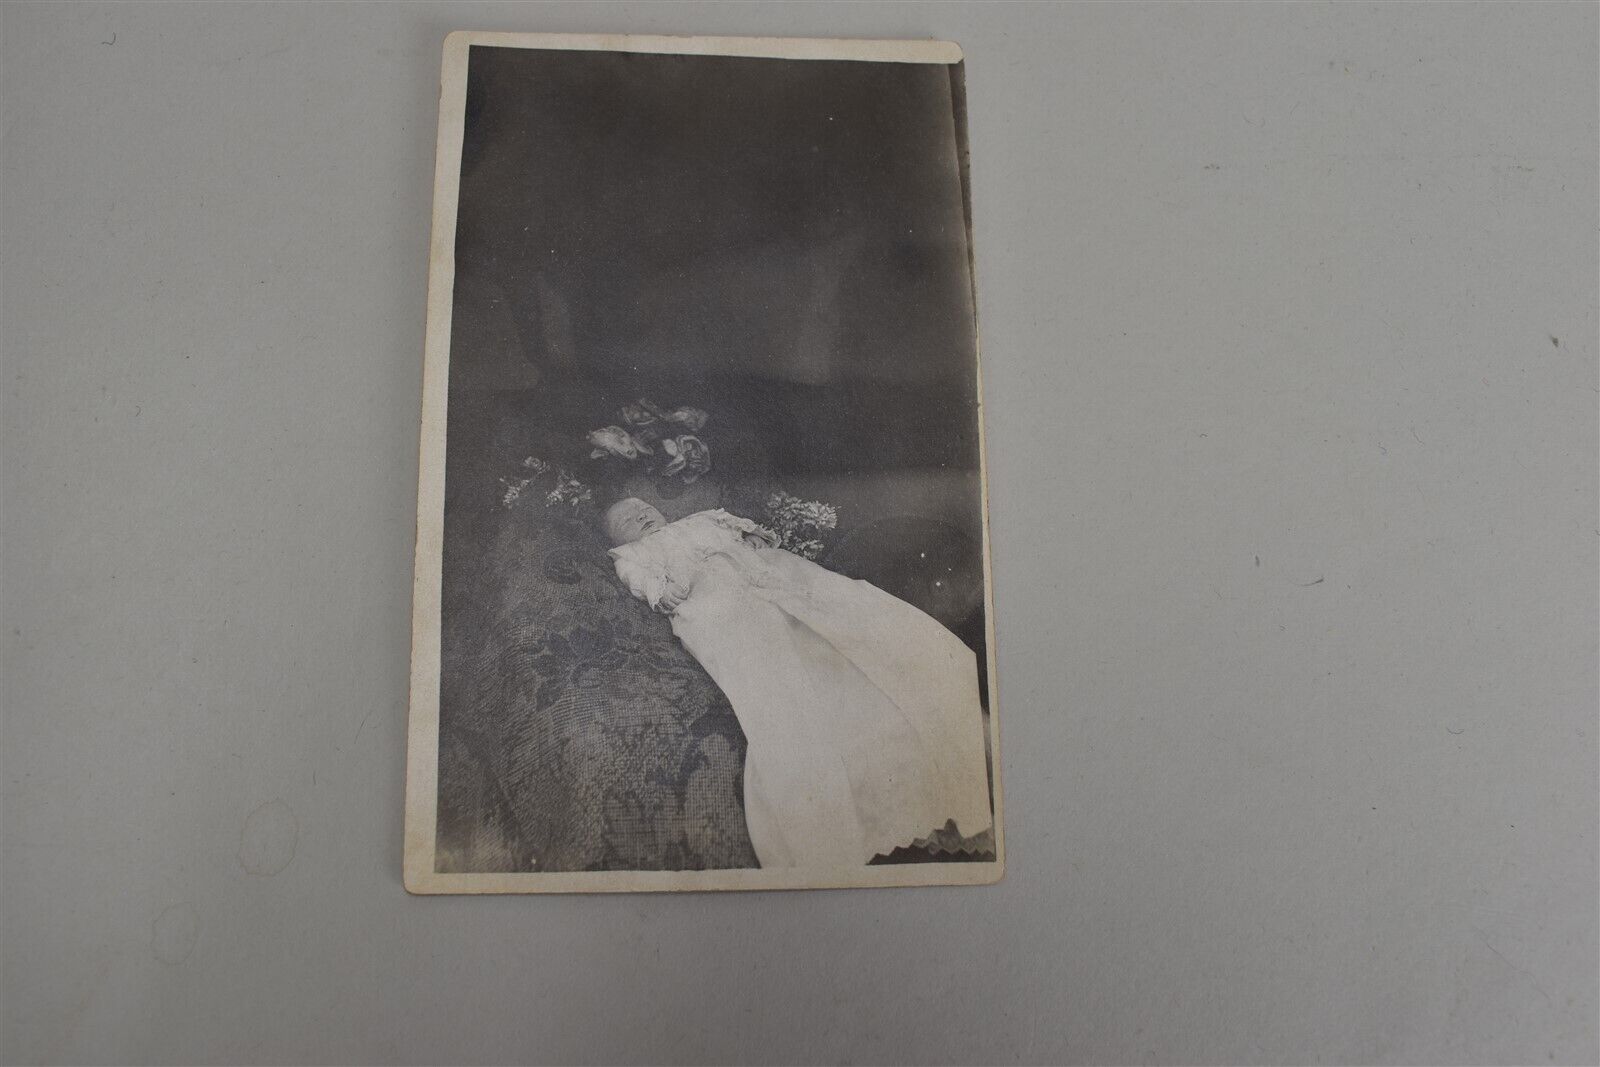 RPCC Post Mortem Dead Baby Postcard Mourning Photo Floral Draped Funeral